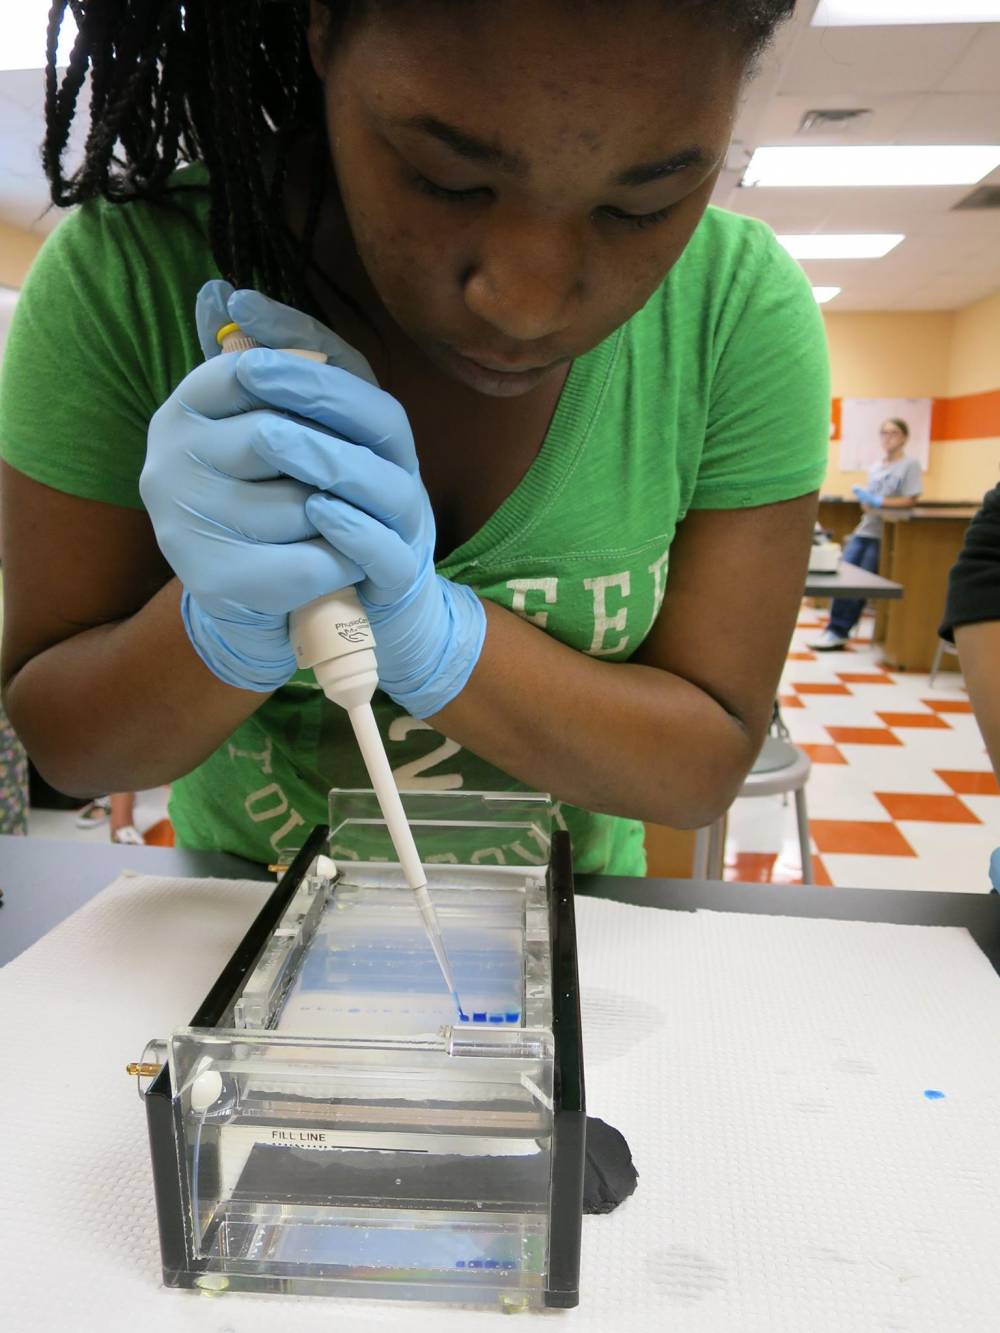 TOP SOUTH CAROLINA COED CAMP: Clemson University Summer Science Camps is a Top Coed Summer Camp located in Clemson South Carolina offering many fun and enriching Coed and other camp programs. 